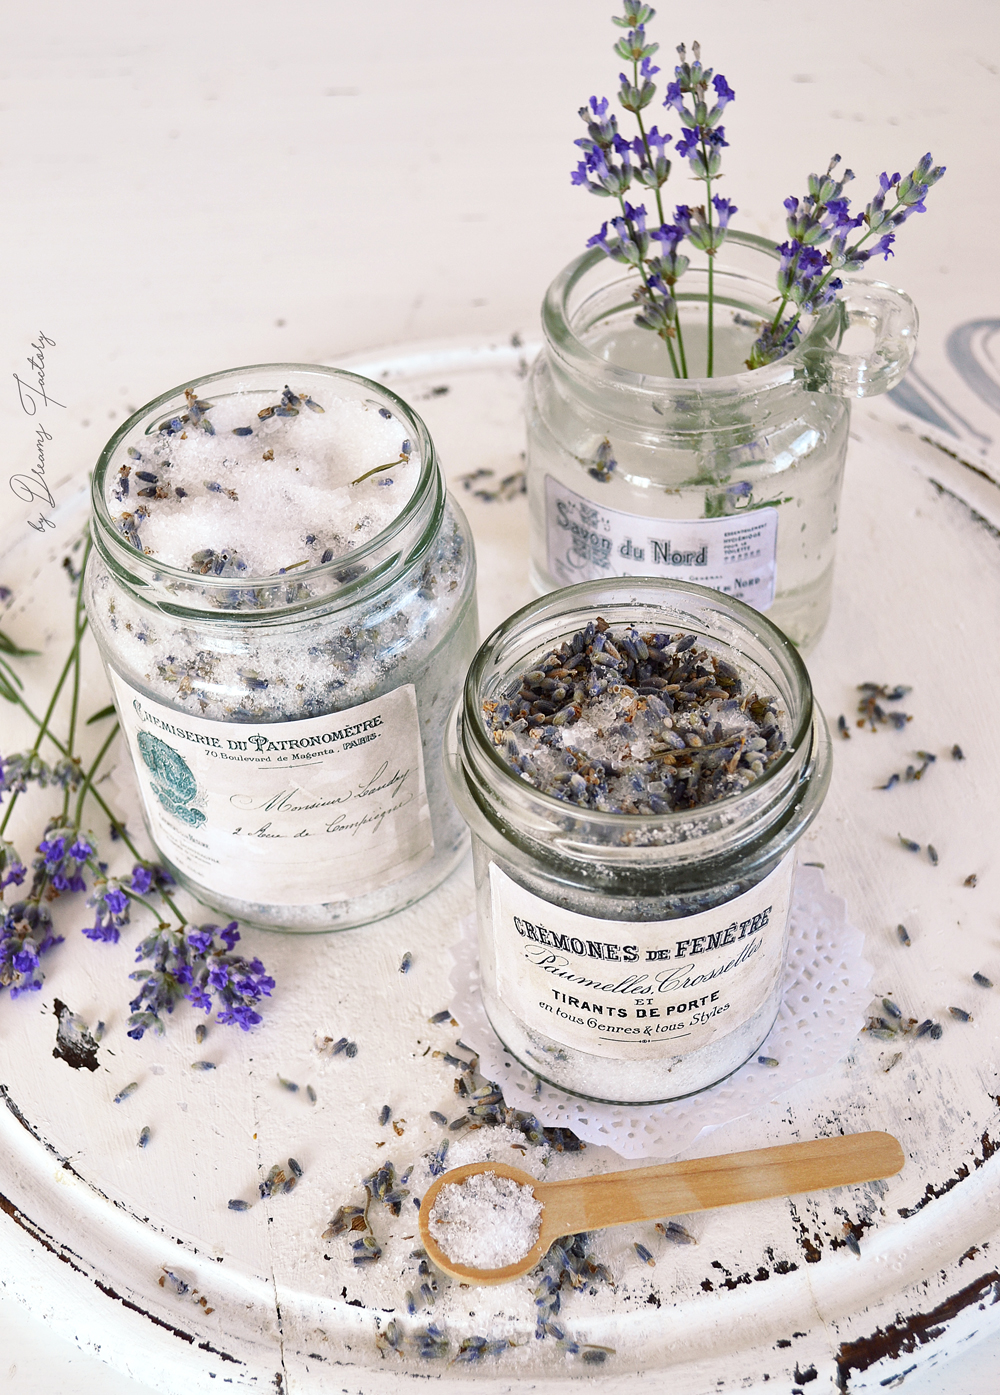 Epsom salt & lavender detox bath soak with therapeutic and relaxing properties - by Dreams factory